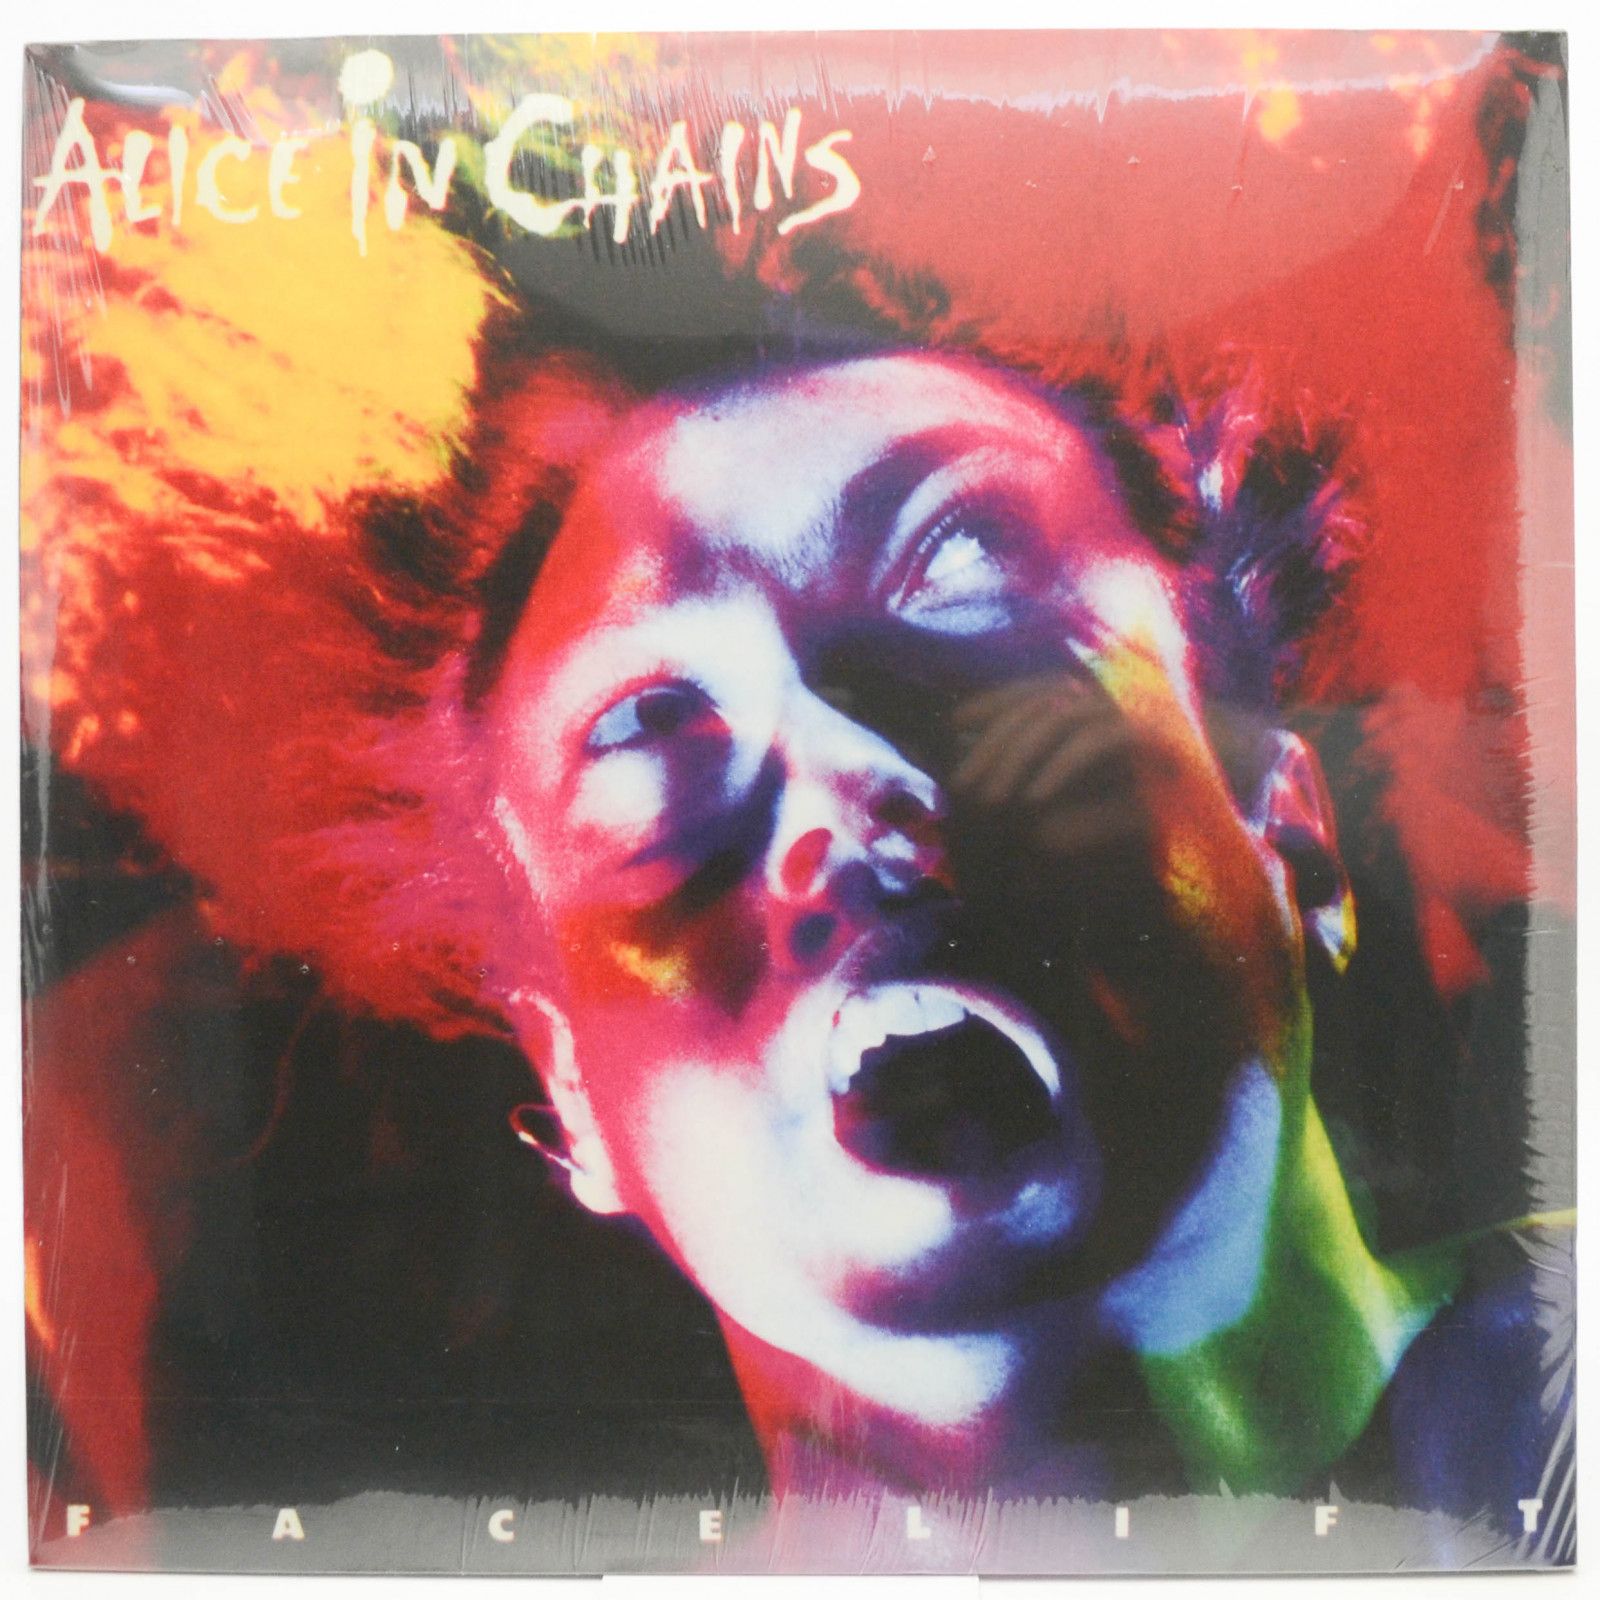 Alice In Chains — Facelift (2LP), 1991